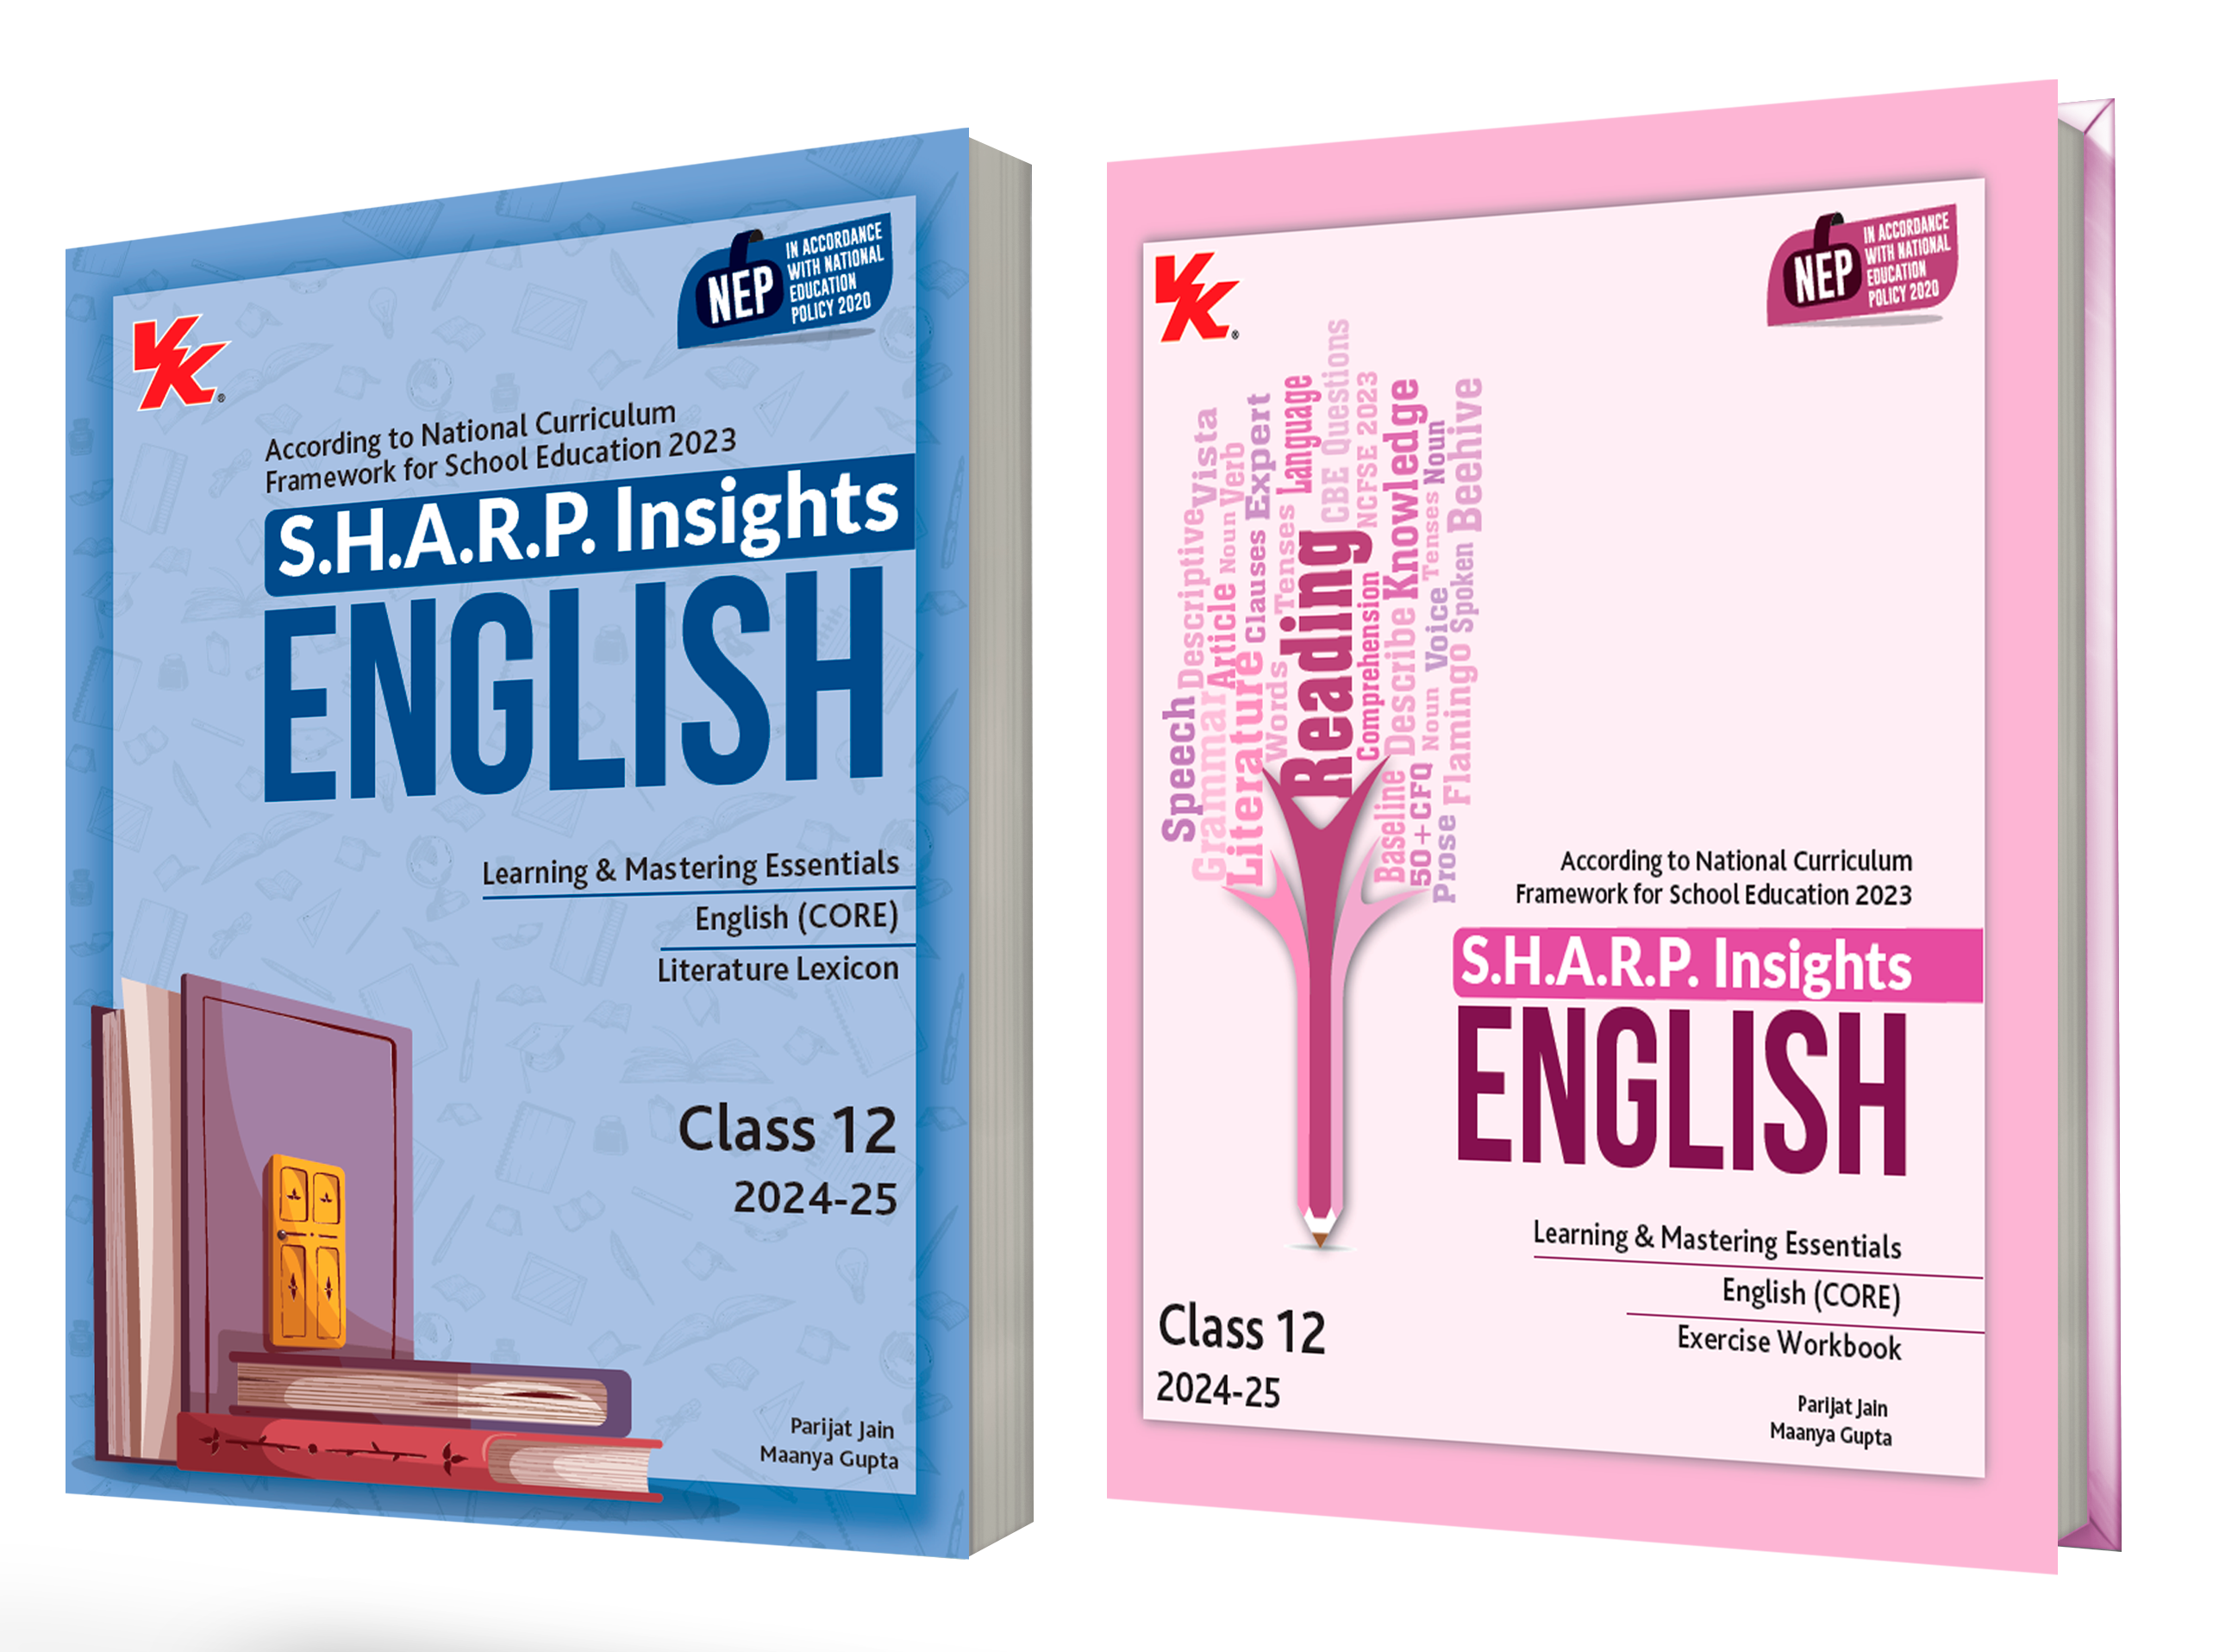 S.H.A.R.P. Insights for English (Core) Lexicon with Exercise Workbook for Class 12 CBSE 2024-25 ( Set of 2 ) by Parijat Jain ( IIT-D, IIM-A ) & Maanya Gupta ( IIM-A)